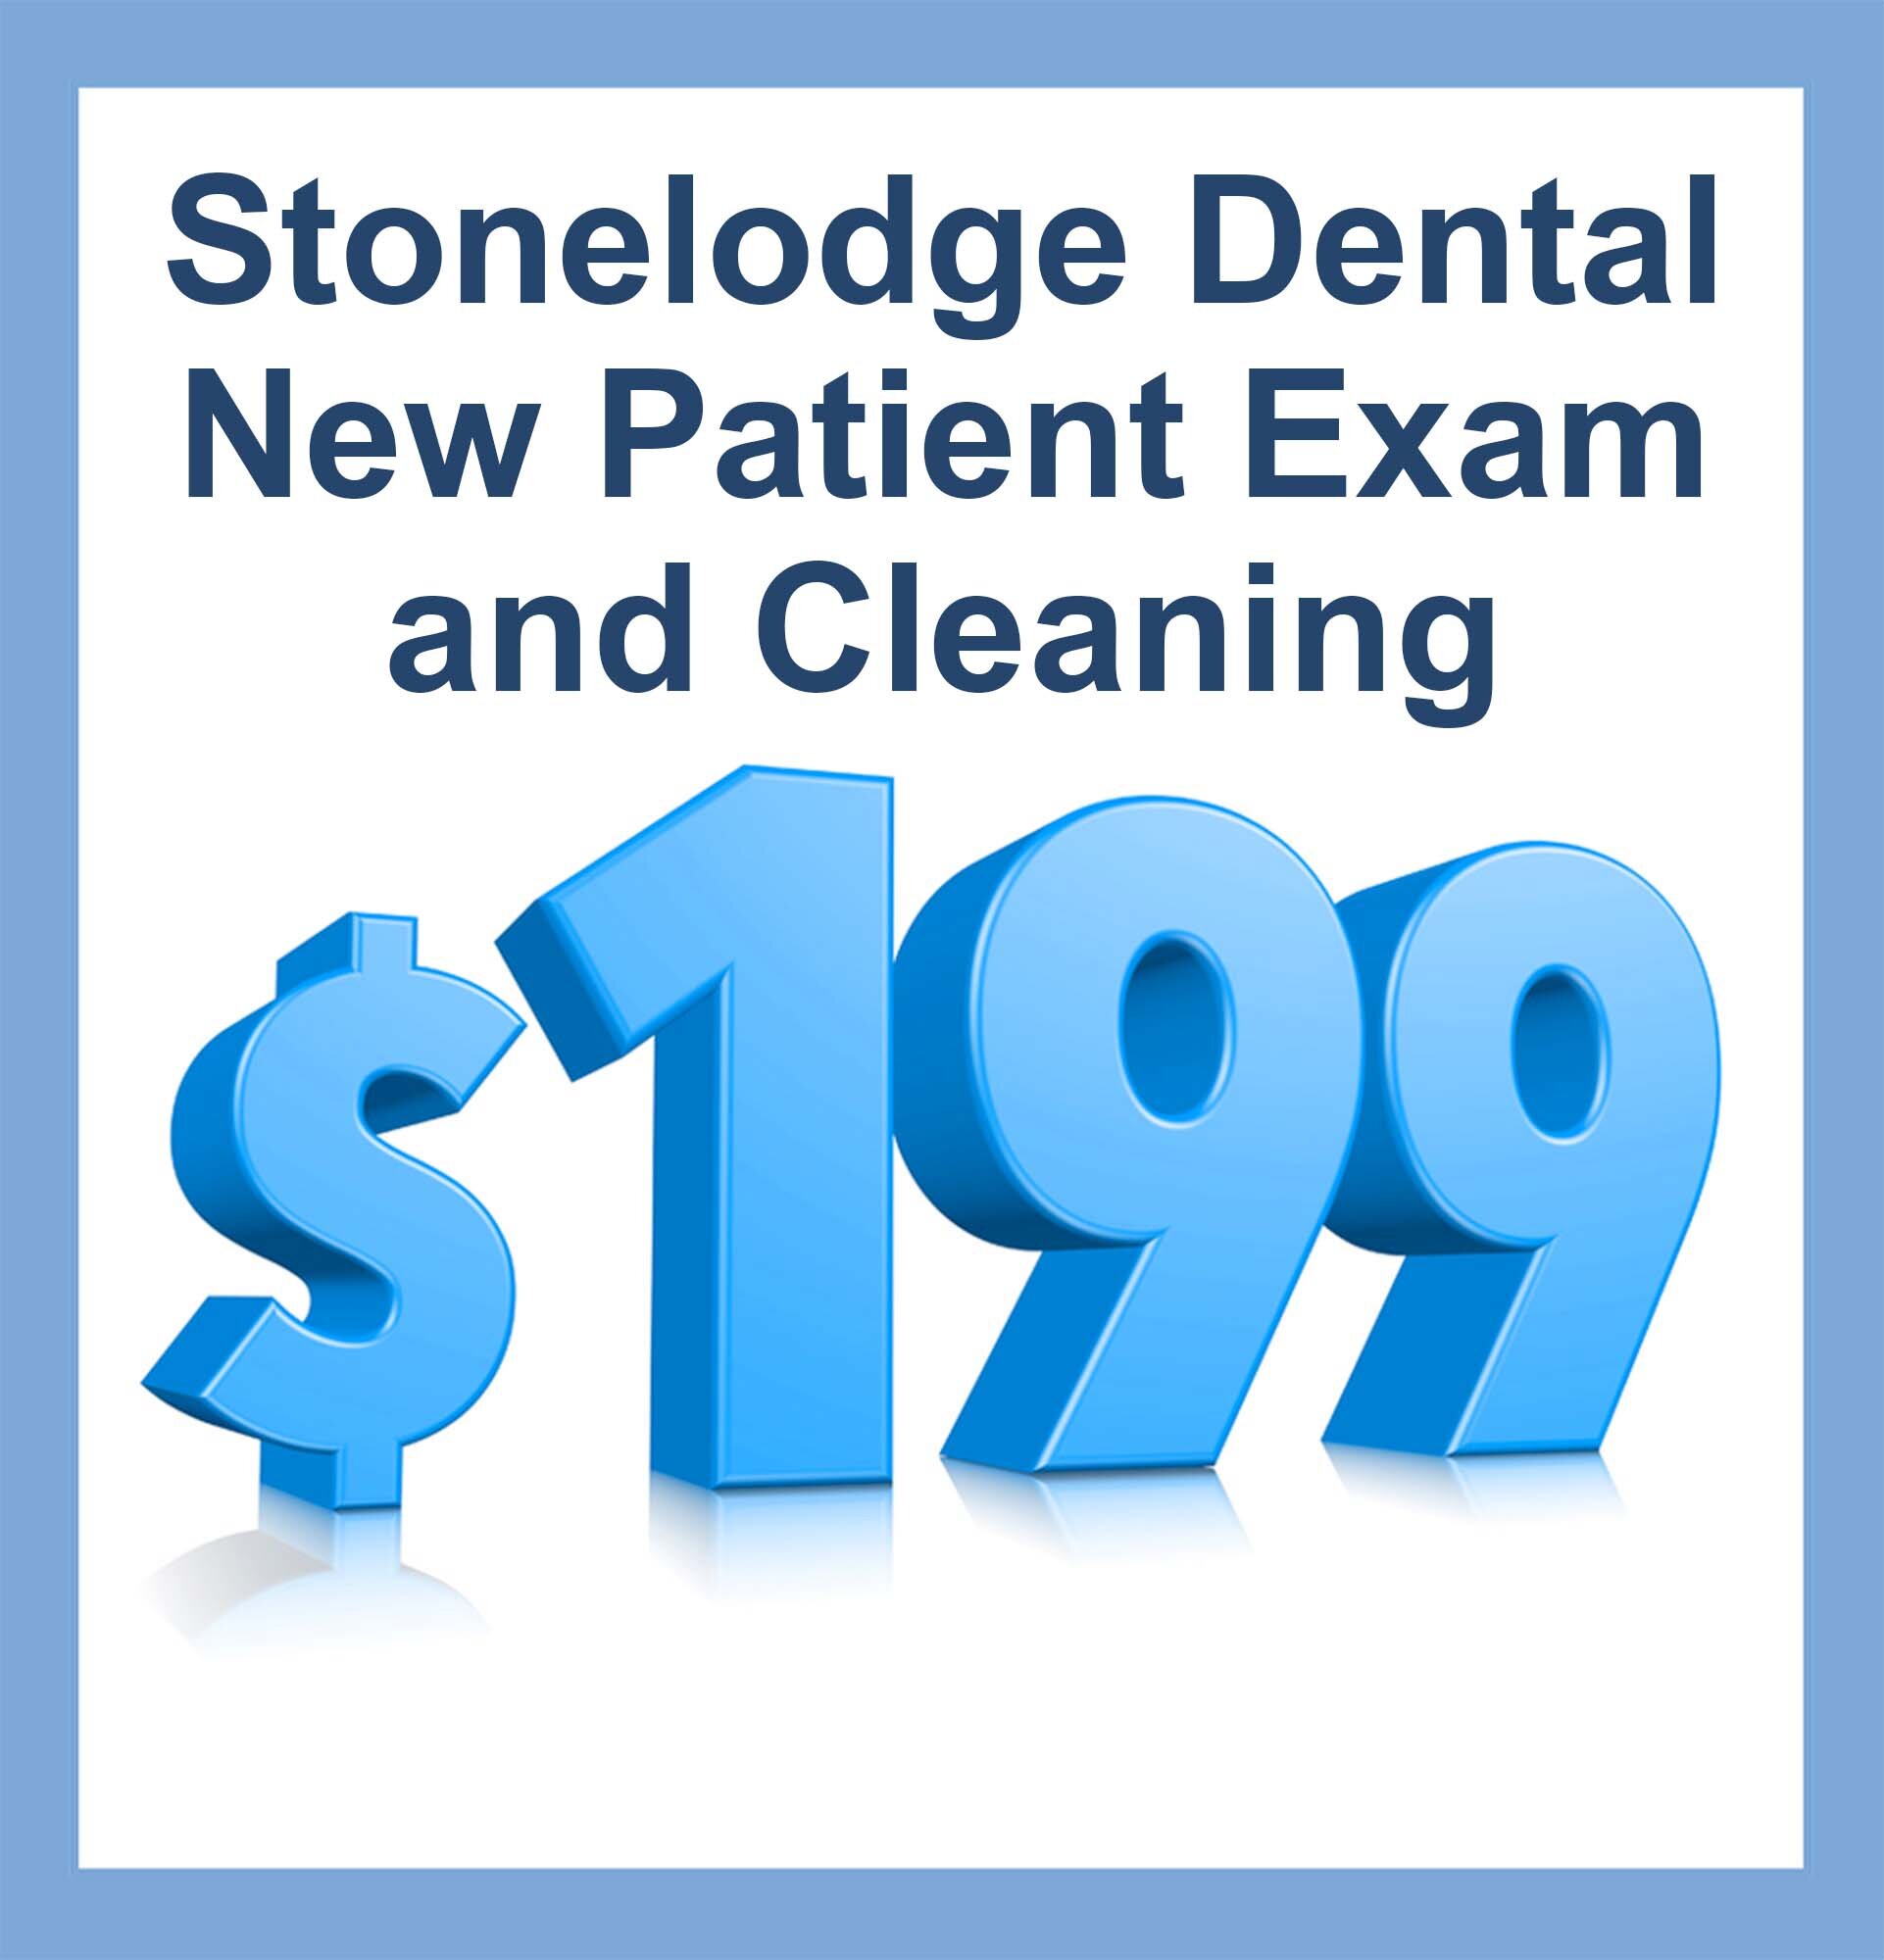 New Patient Specials Exam and Cleaning Patient Special Offers - McKinney Dentist Dentist in McKinney